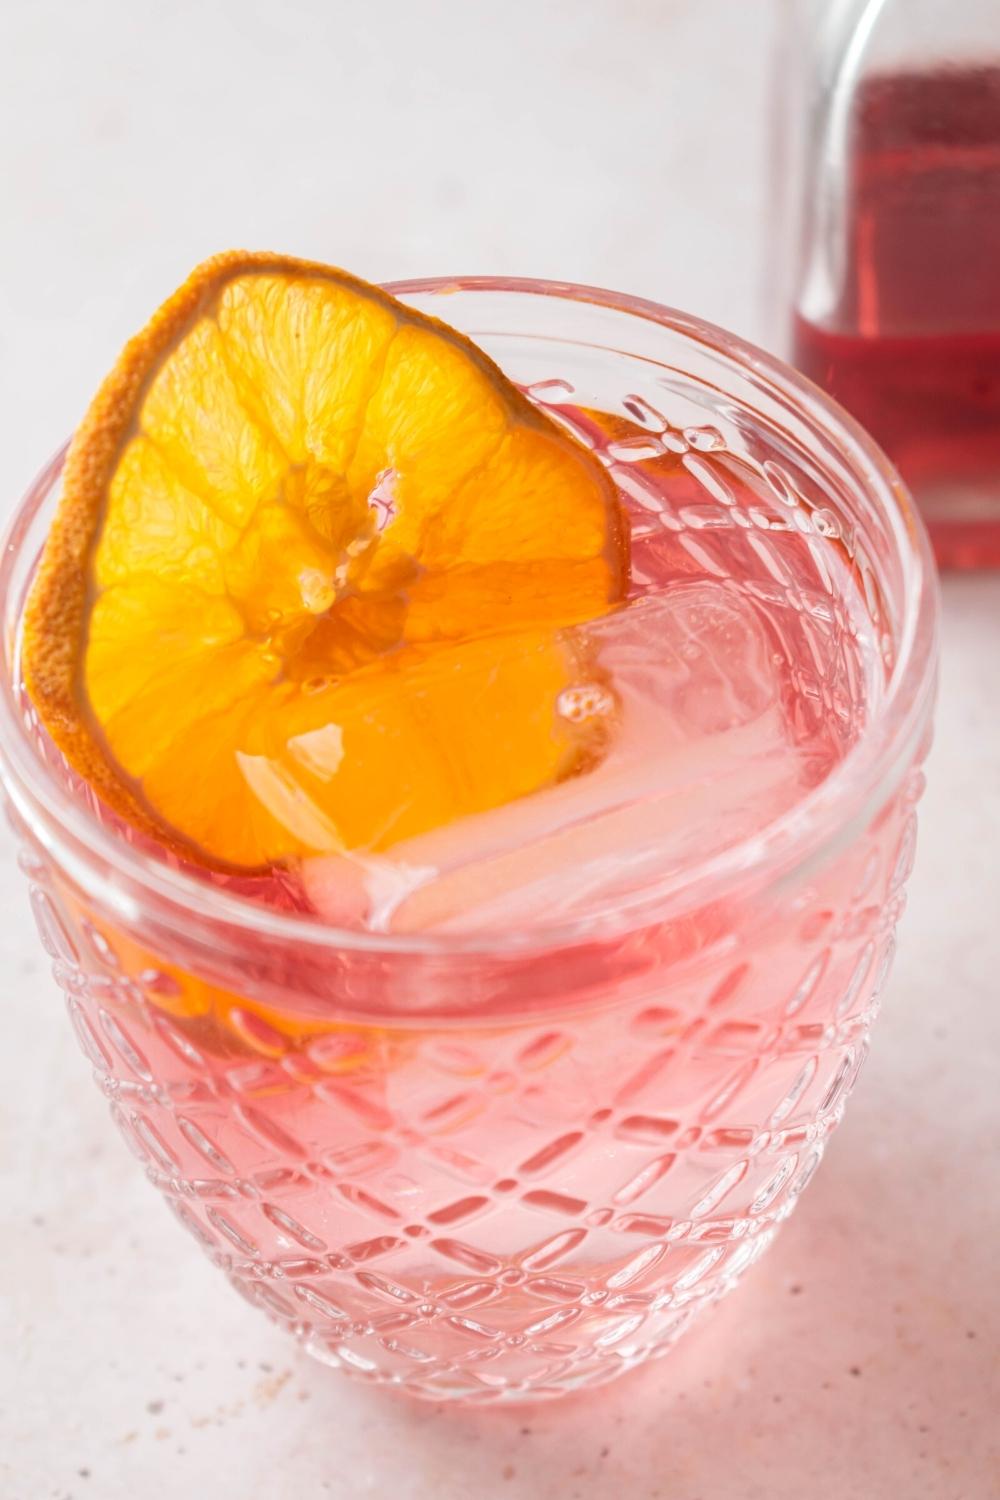 A glass filled with pink lemonade vodka, a lemon slice, and some ice cubes.